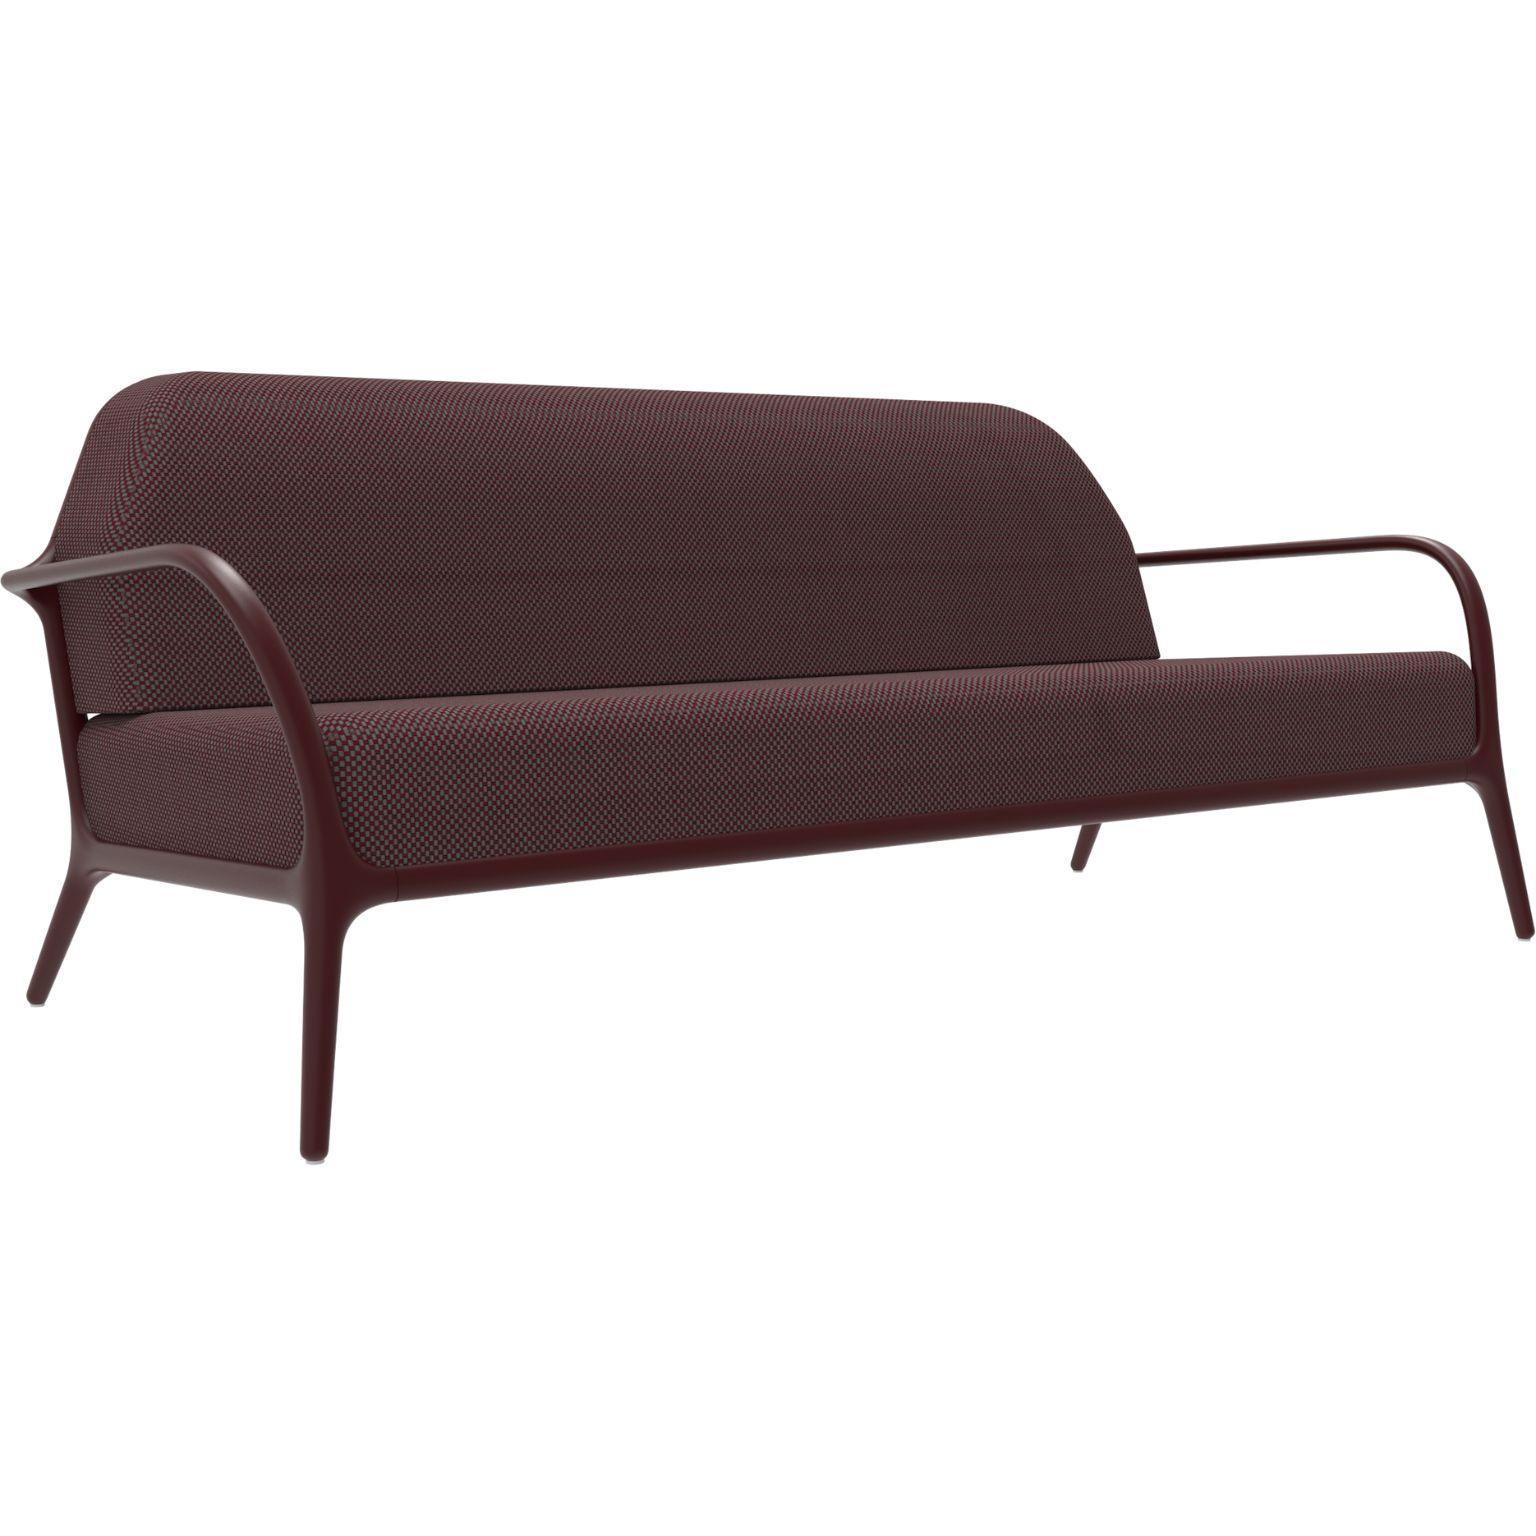 Xaloc Burgundy sofa by MOWEE
Dimensions: D100 x W200 x H81 cm (Seat Height 42 cm)
Material: Aluminum, Textile
Weight: 46 kg
Also Available in different colors and finishes. 

 Xaloc synthesizes the lines of interior furniture to extrapolate to